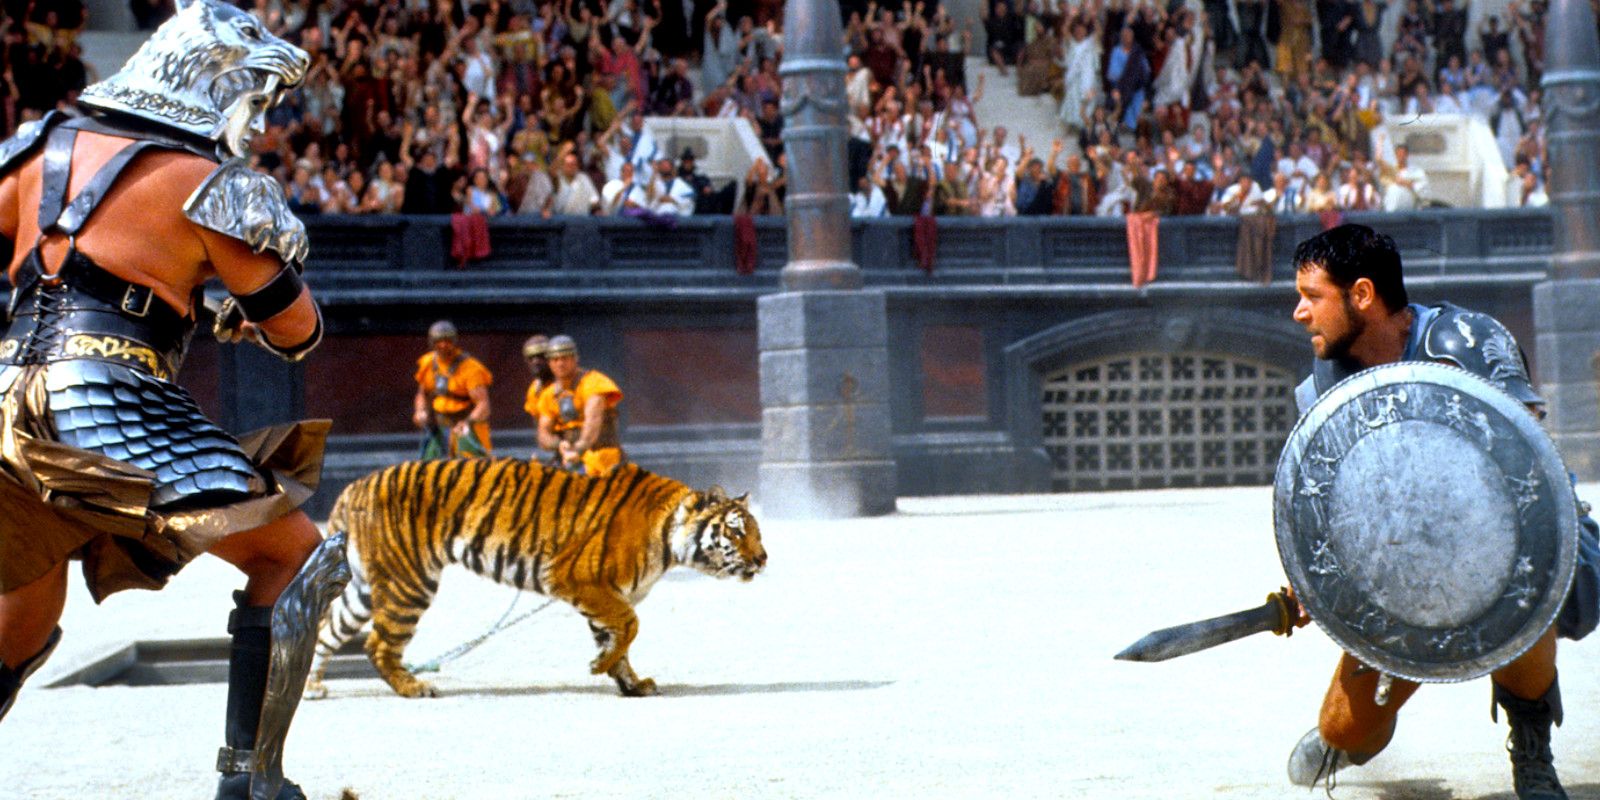 Maximus fighting Tigris and tigers in Gladiator